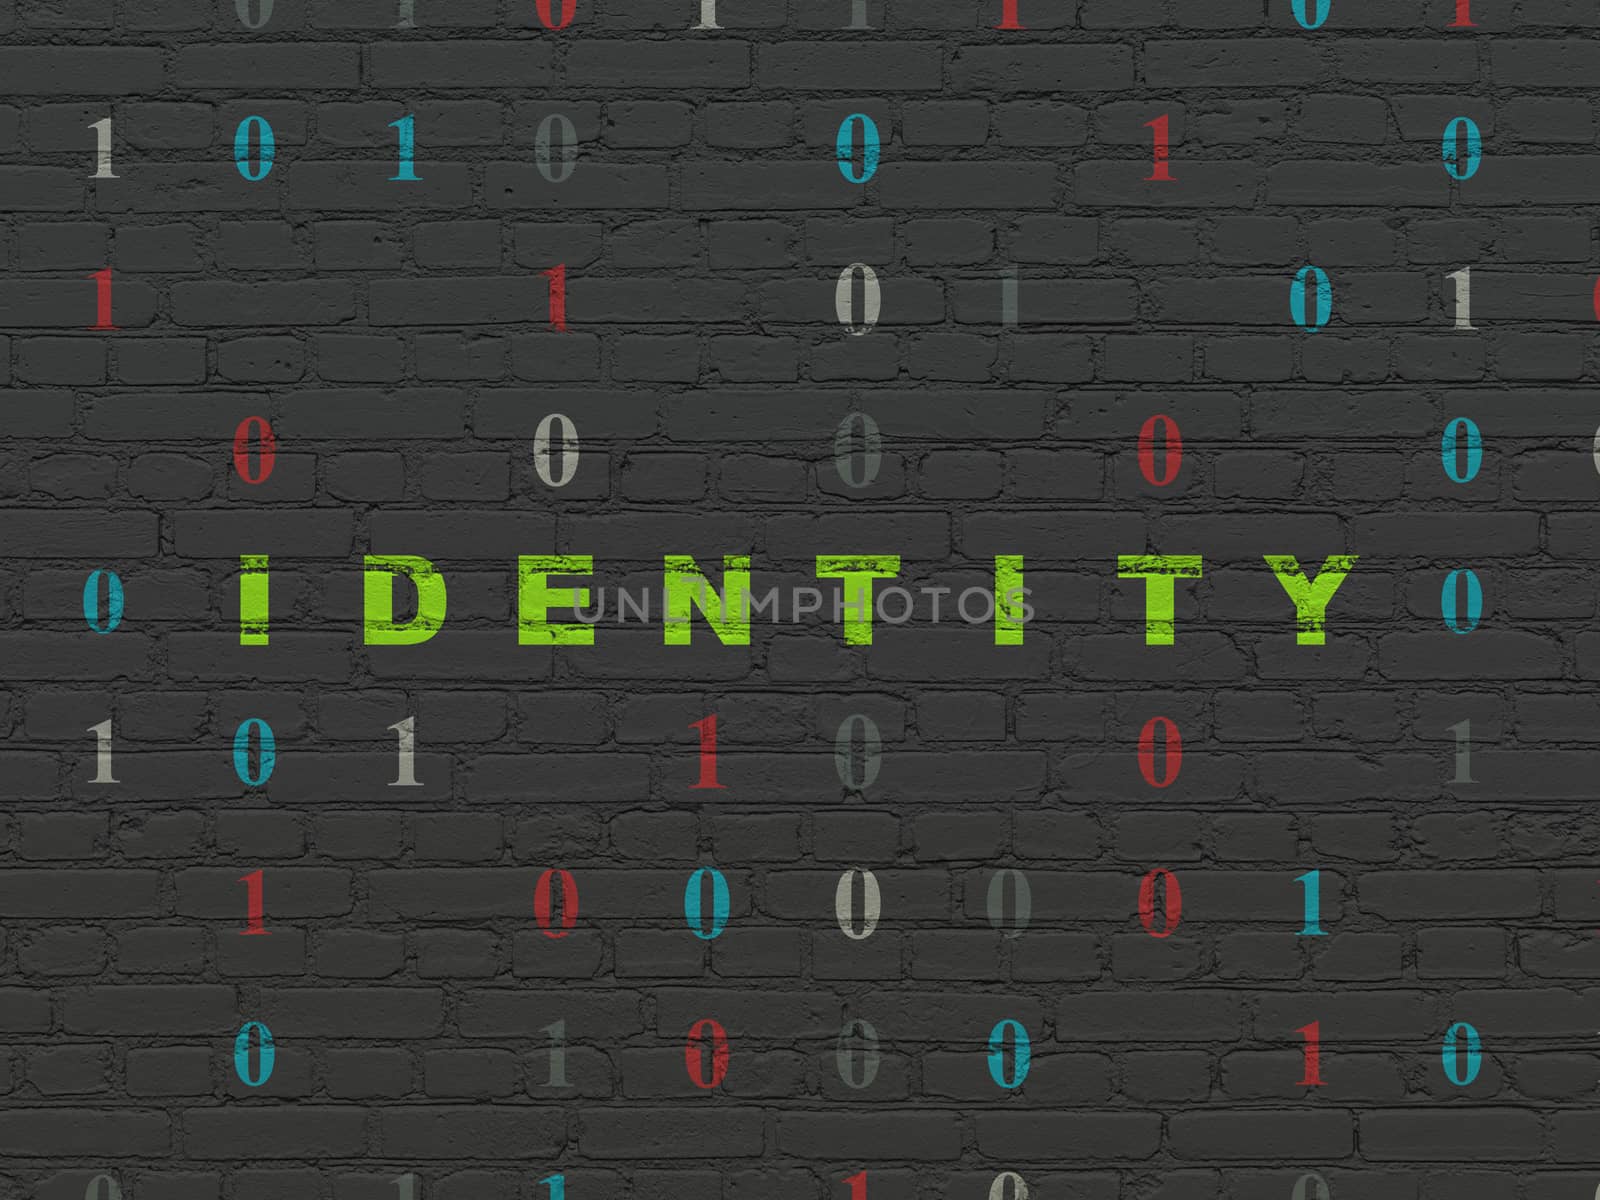 Privacy concept: Painted green text Identity on Black Brick wall background with Binary Code